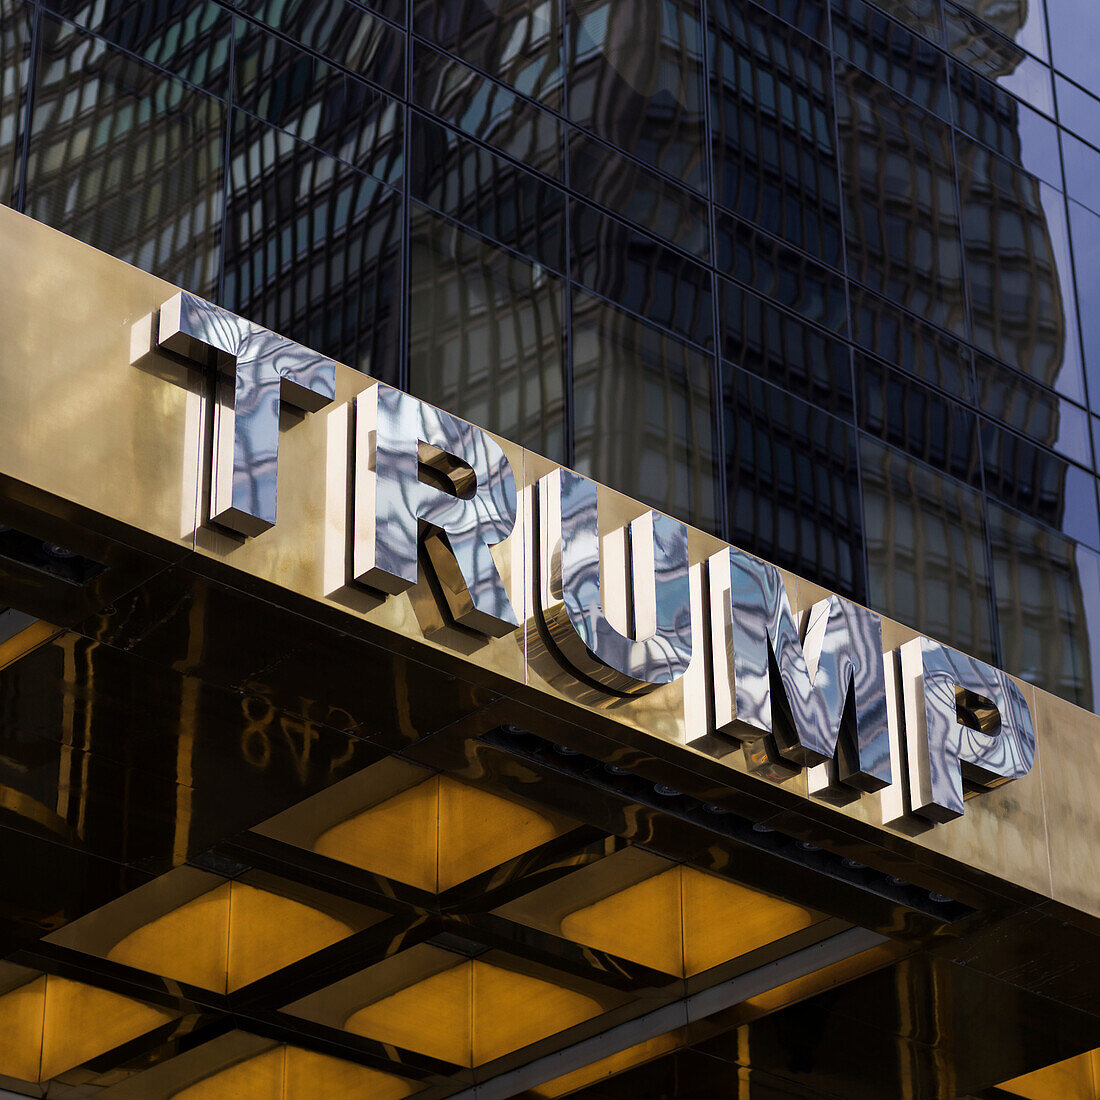 'Sign at the bottom of Trump Tower; New York City, New York, United States of America'